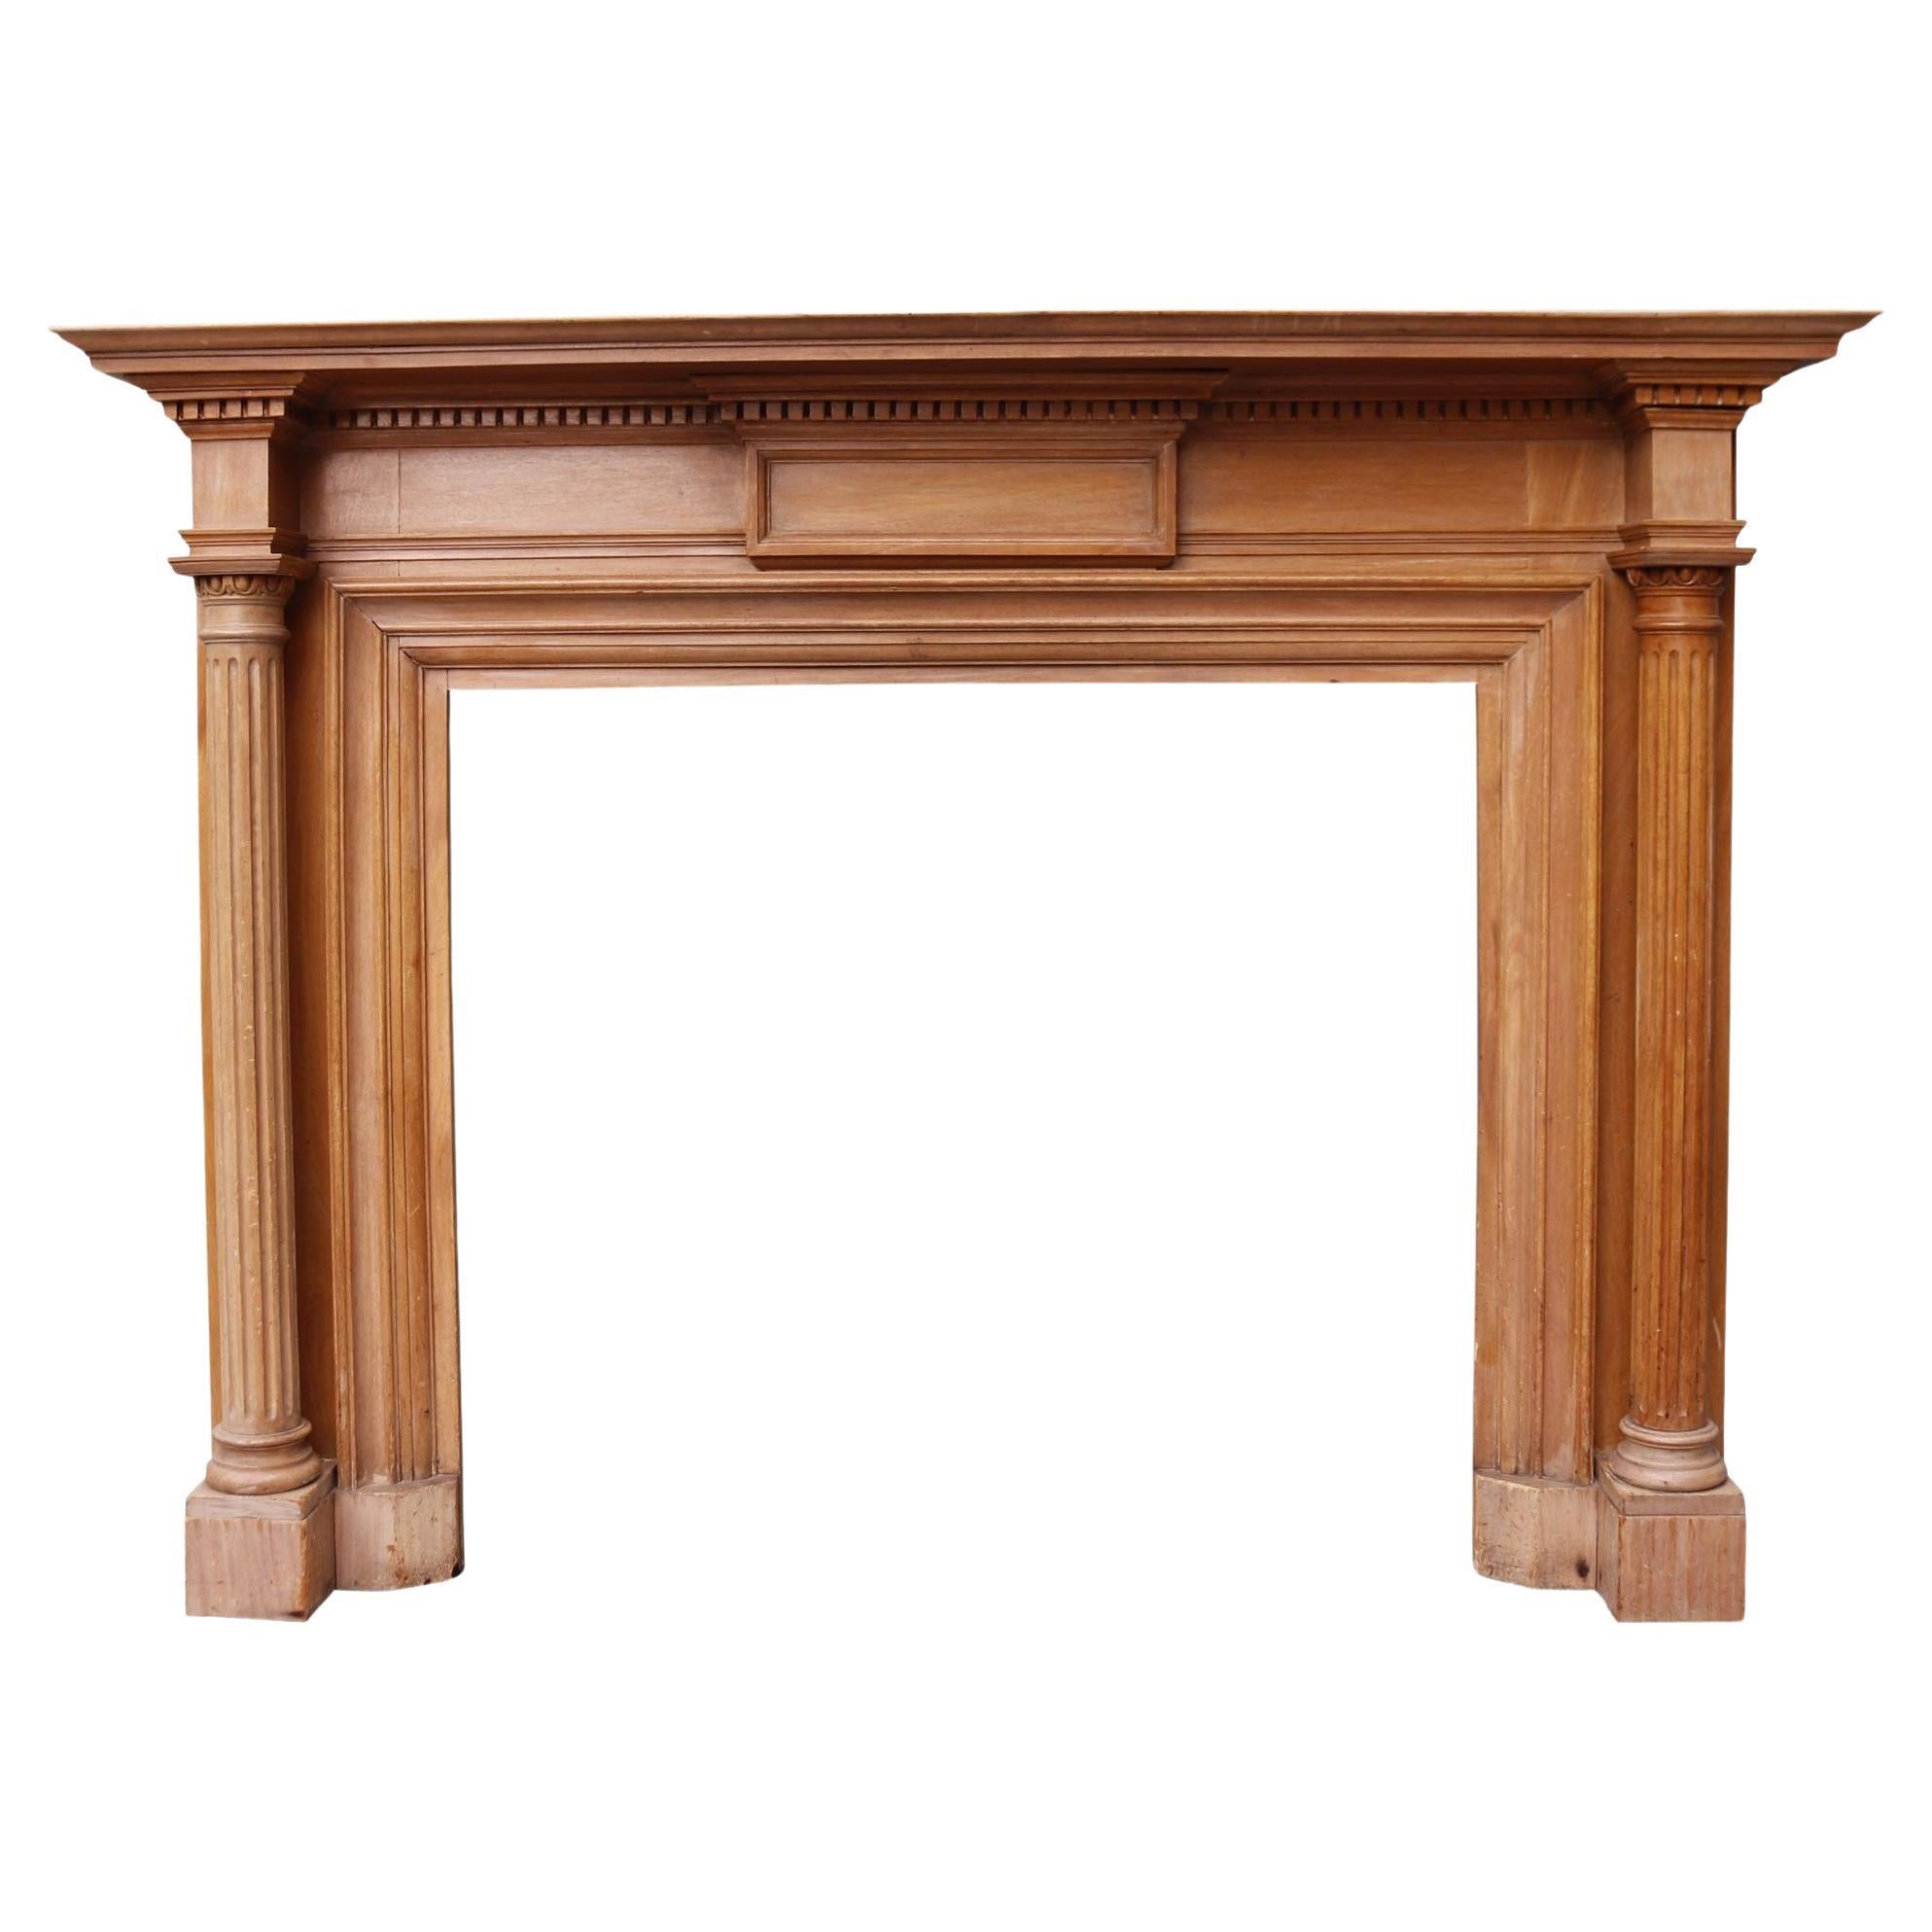 Beech Fireplaces and Mantels